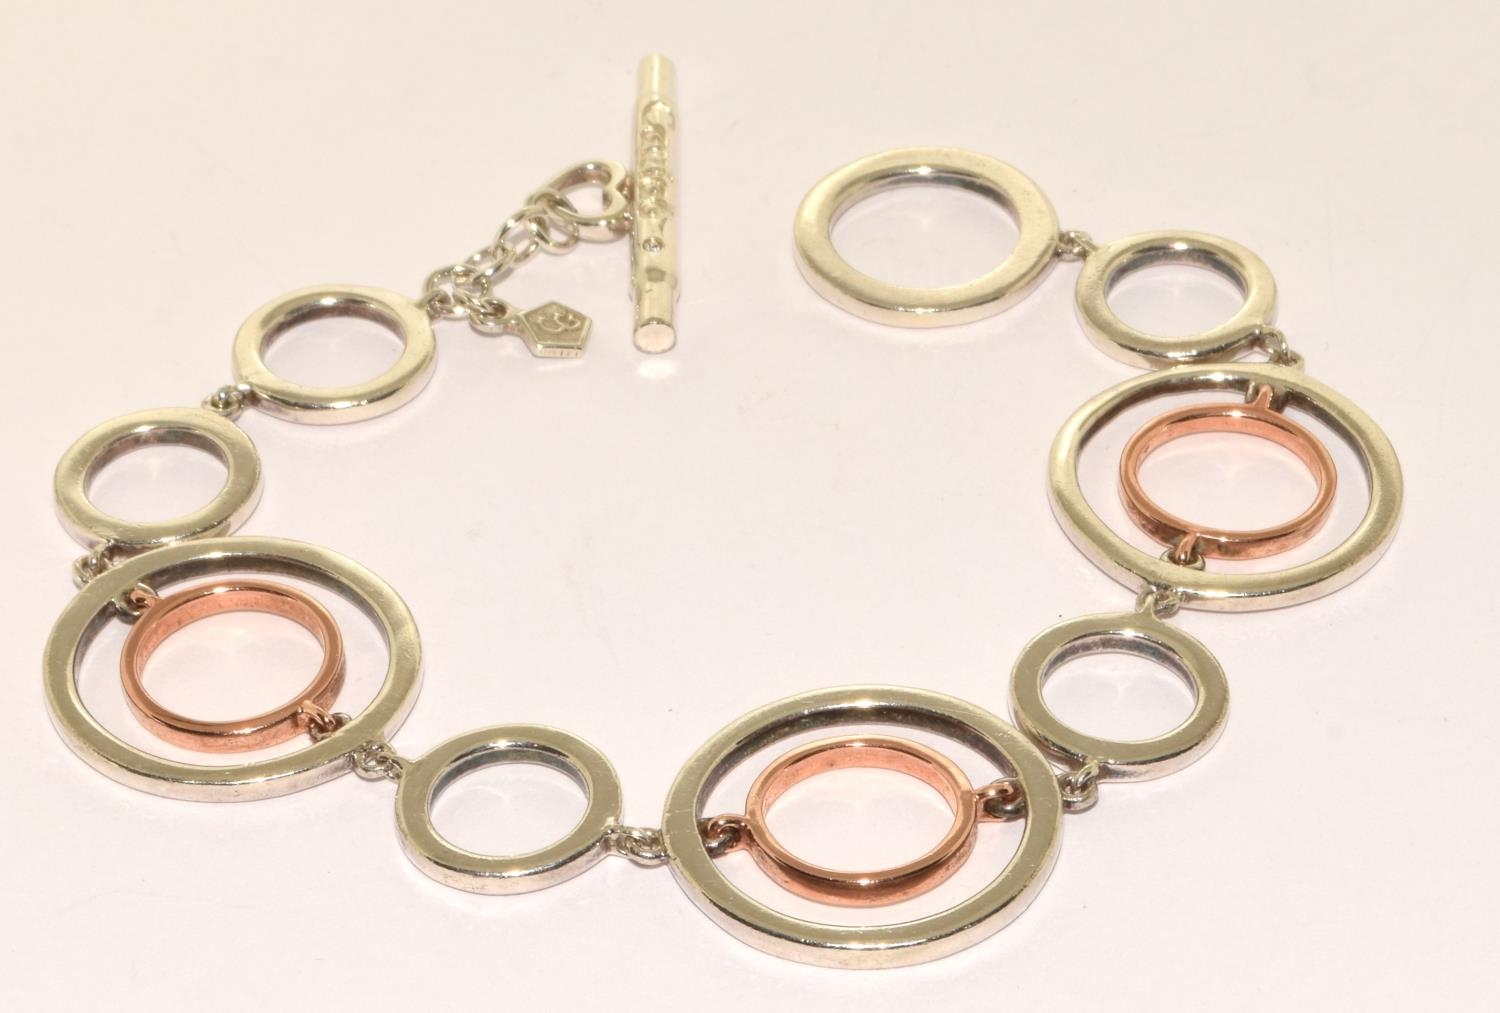 Clogau silver and 9ct gold bracelet in Clogau box - Image 2 of 4